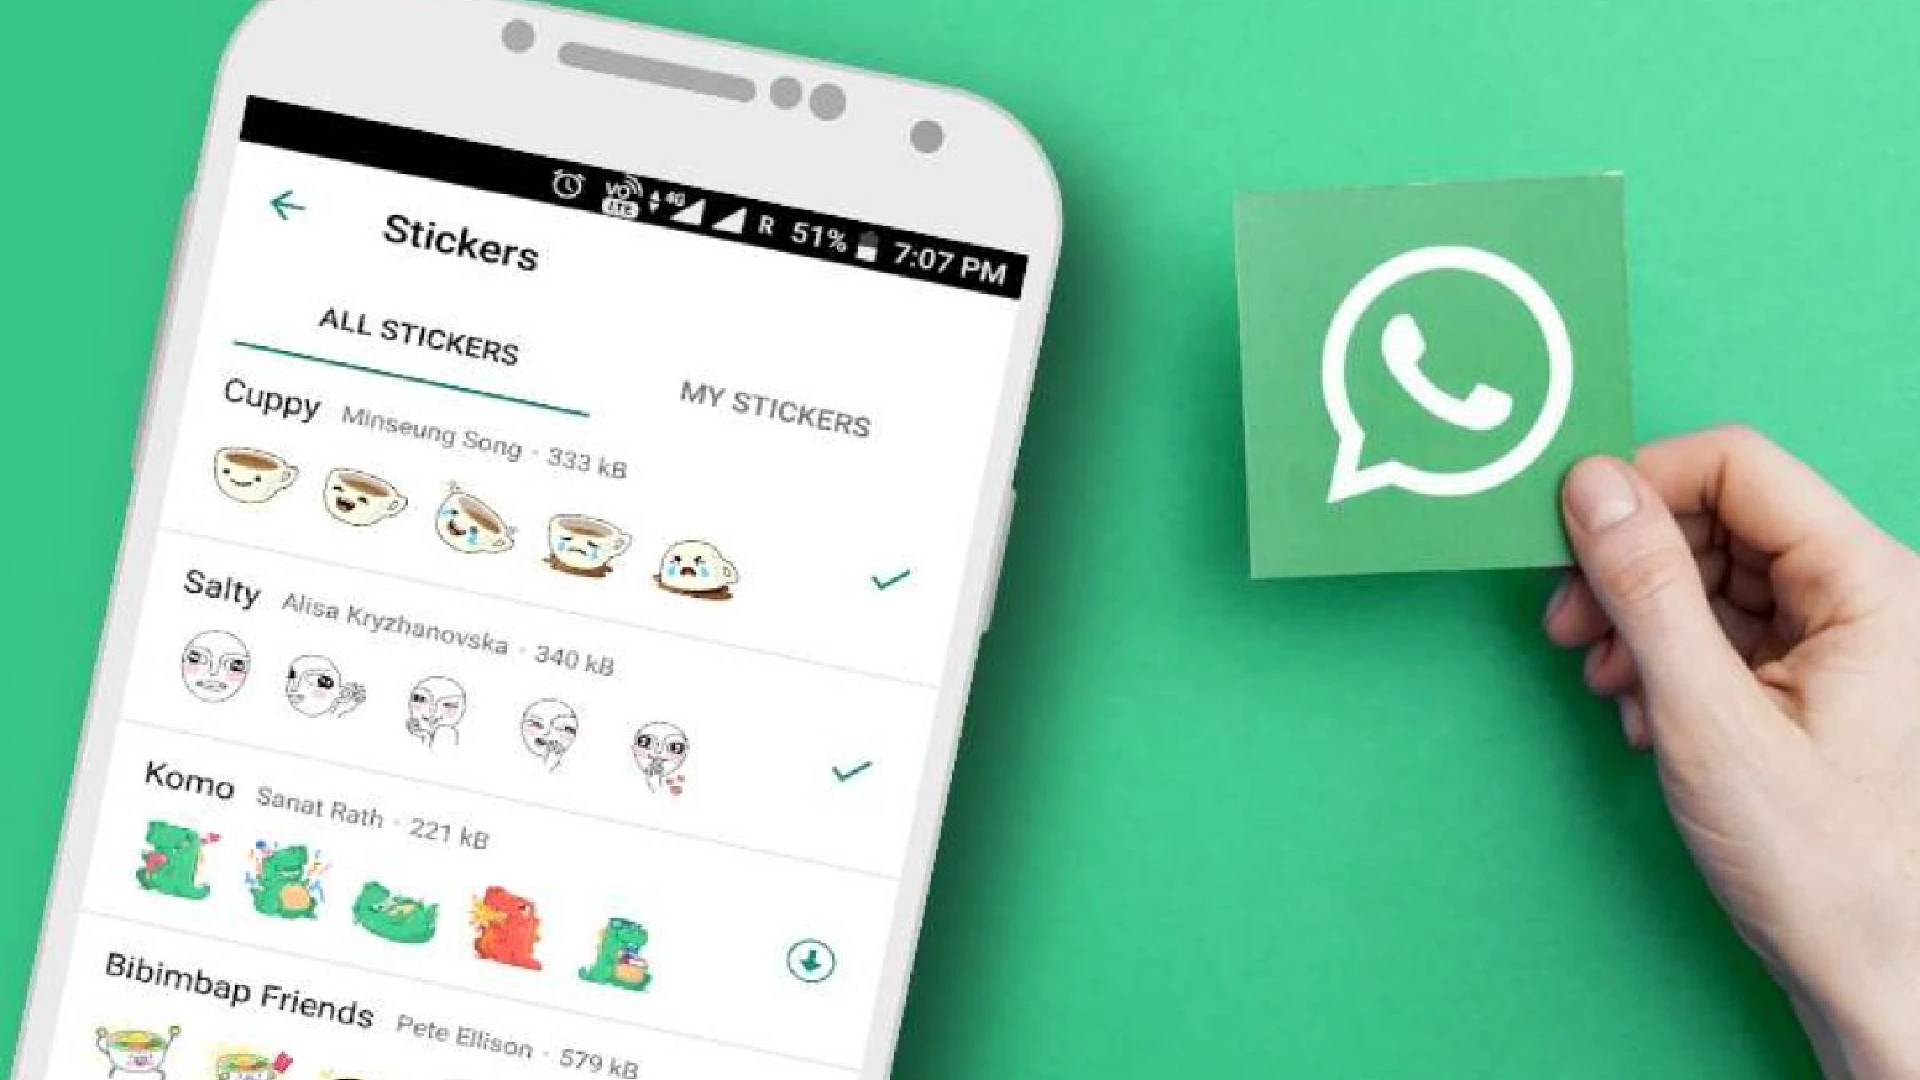 How to create personalized WhatsApp stickers with the new sticker maker tool